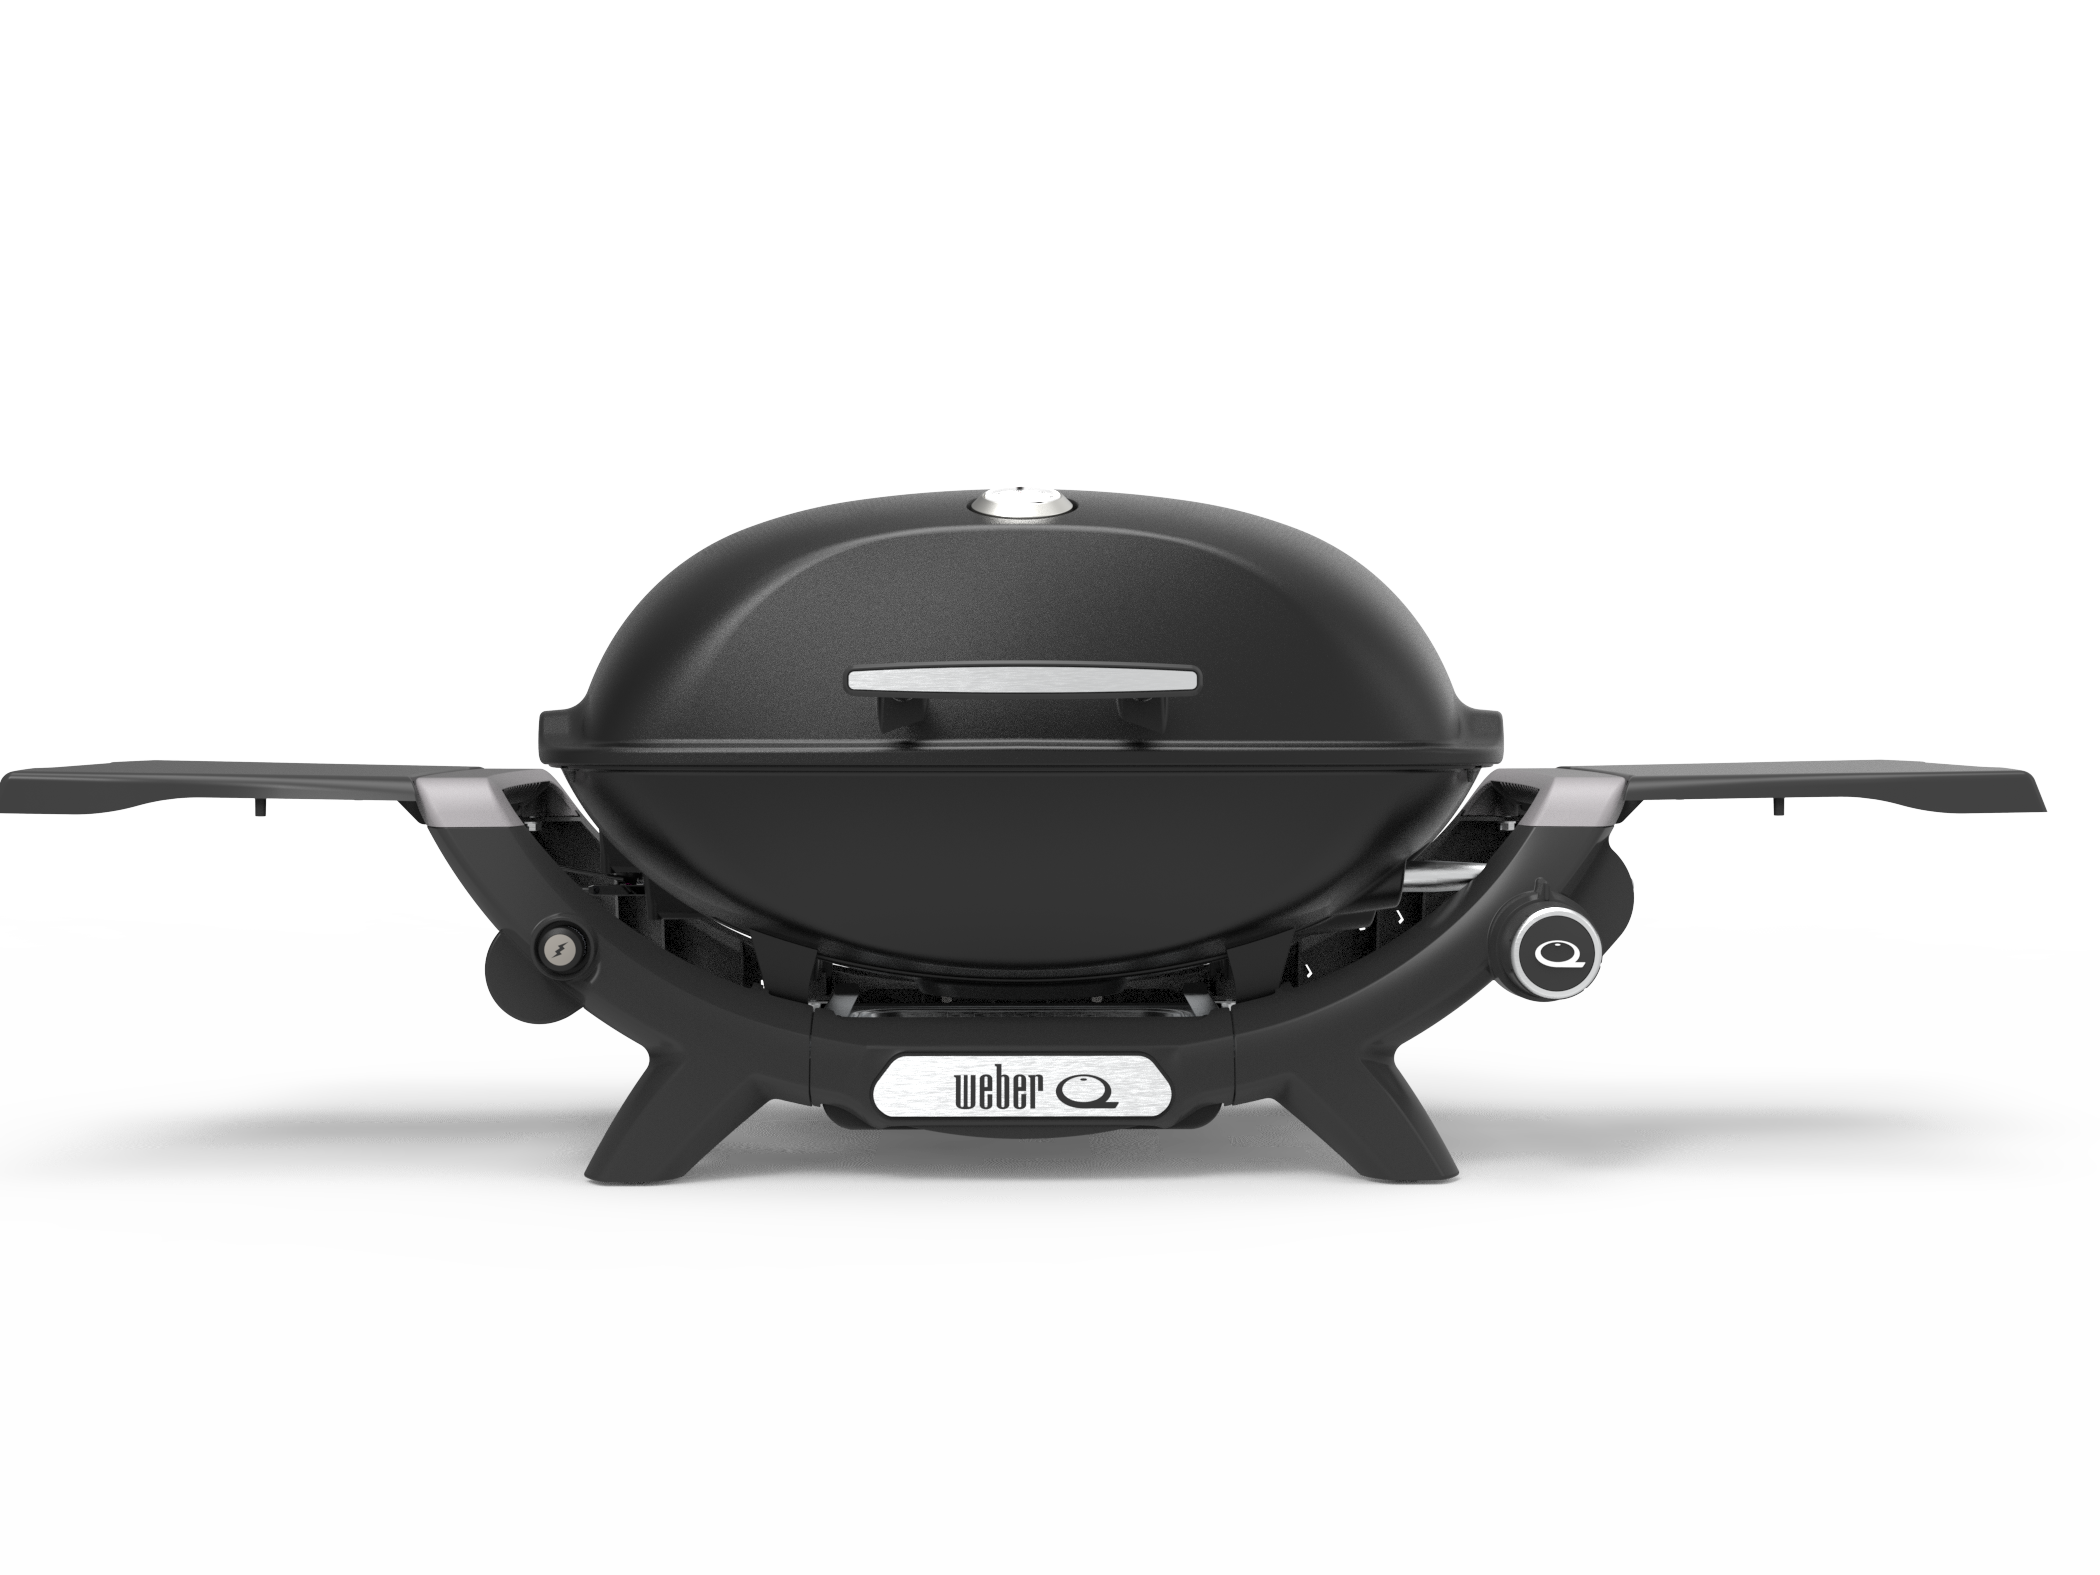 Weber Q 2200N front view in midnight black colour